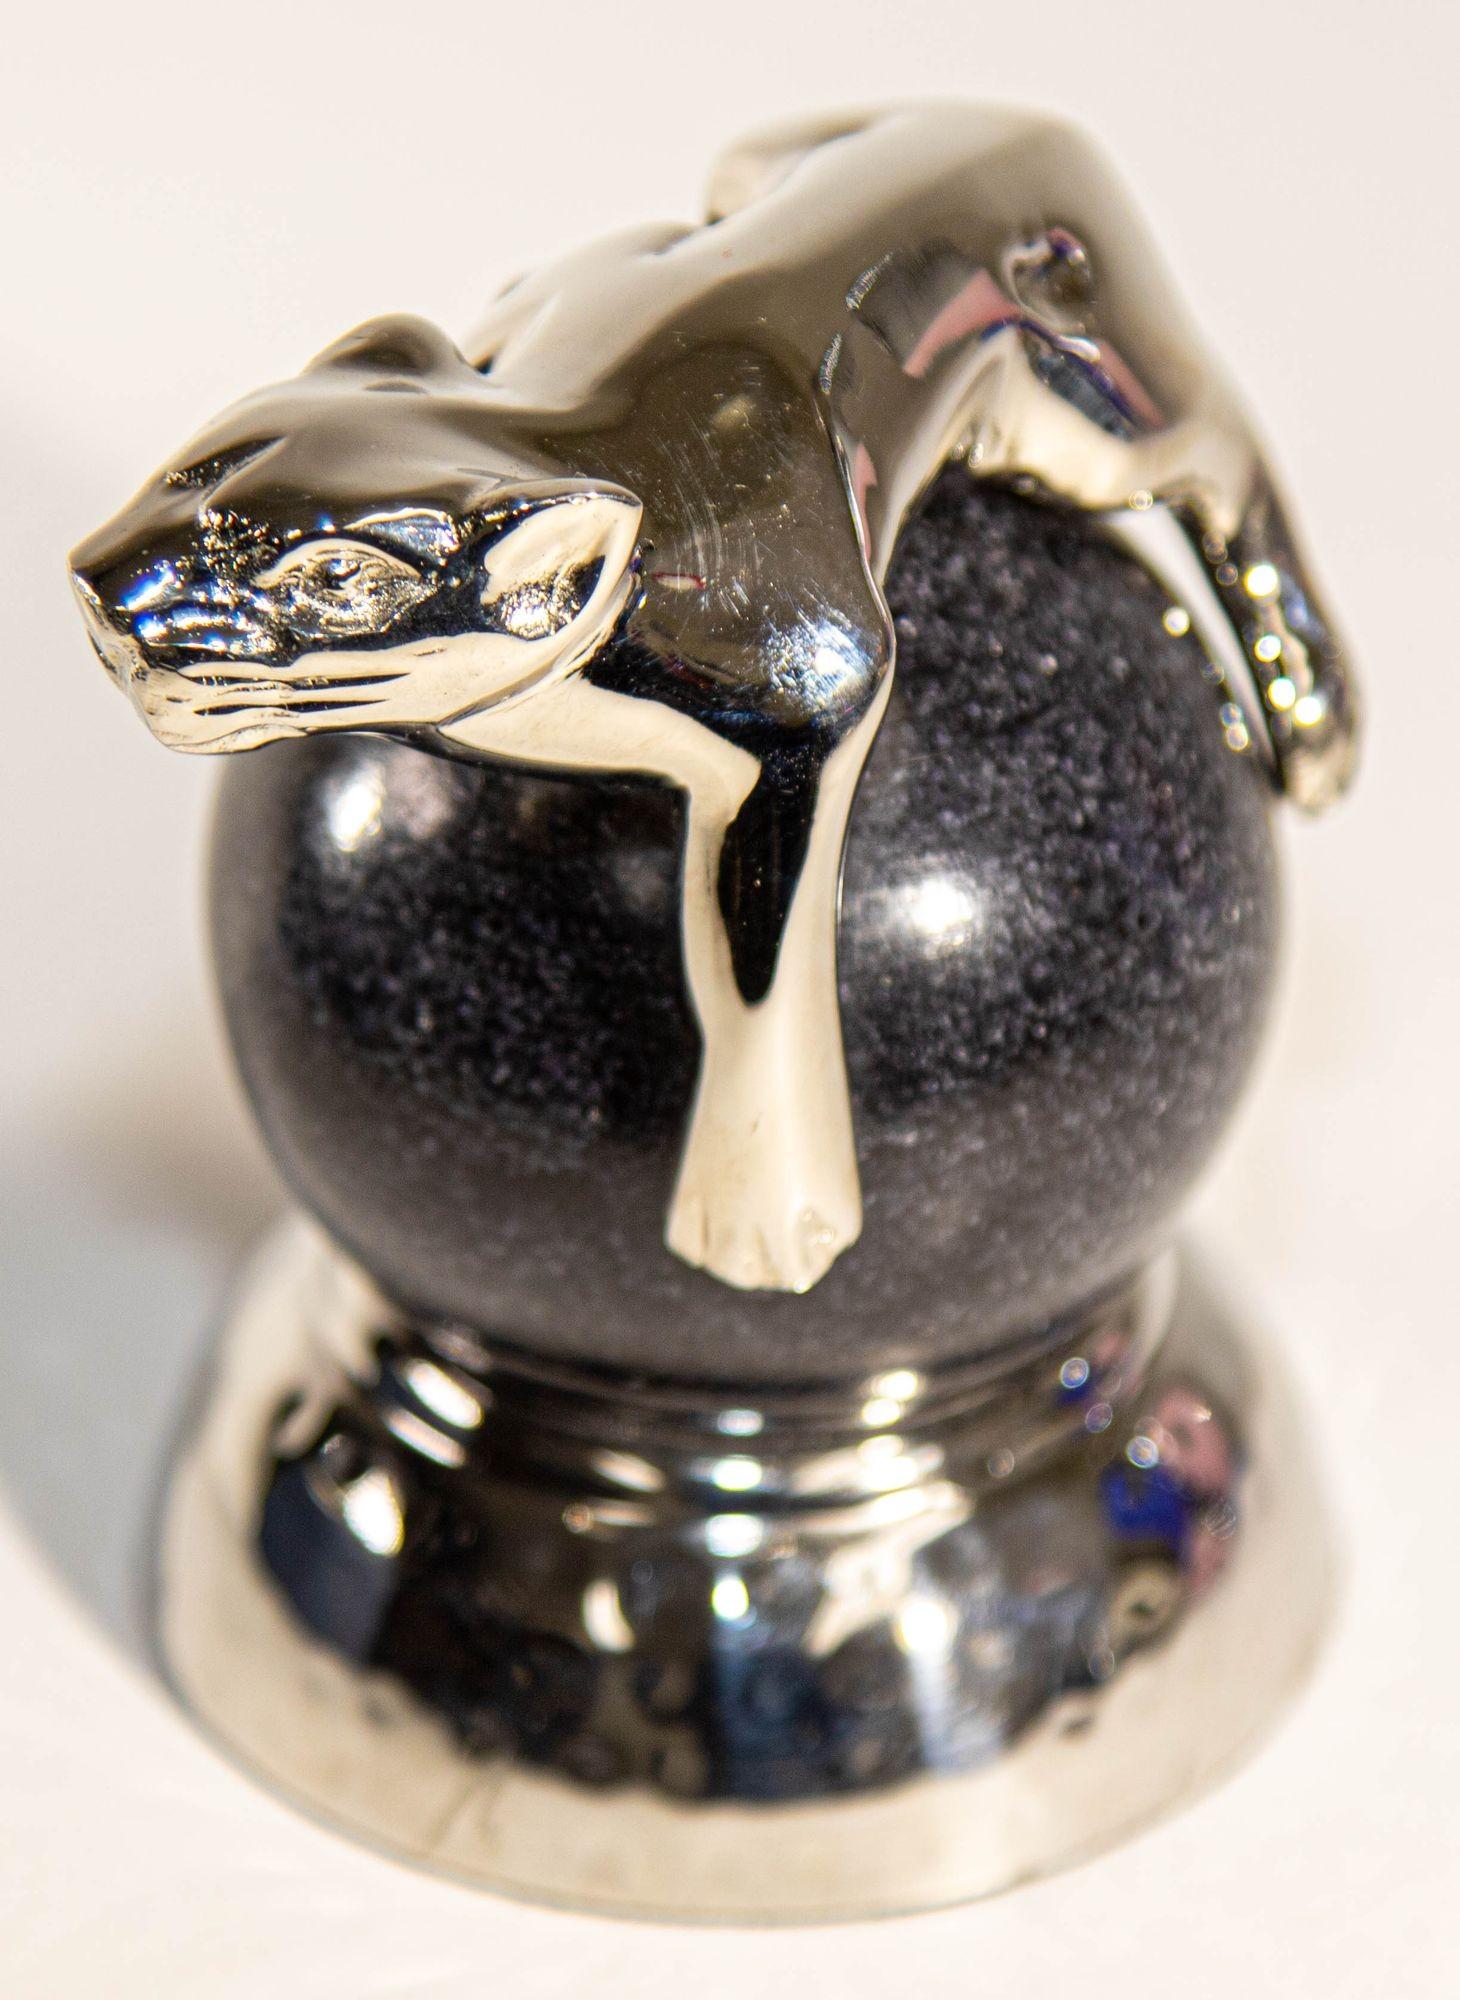 A Silver Panther Paperweight on a Black Marble Ball By: Mary Jurek Design Inc.
Mary Jurek Panther Paperweight Marble Ball and Chrome.
Designed as a panther on a black marble ball.
A preying Panthere paperweight perched on black marble.
An ideal